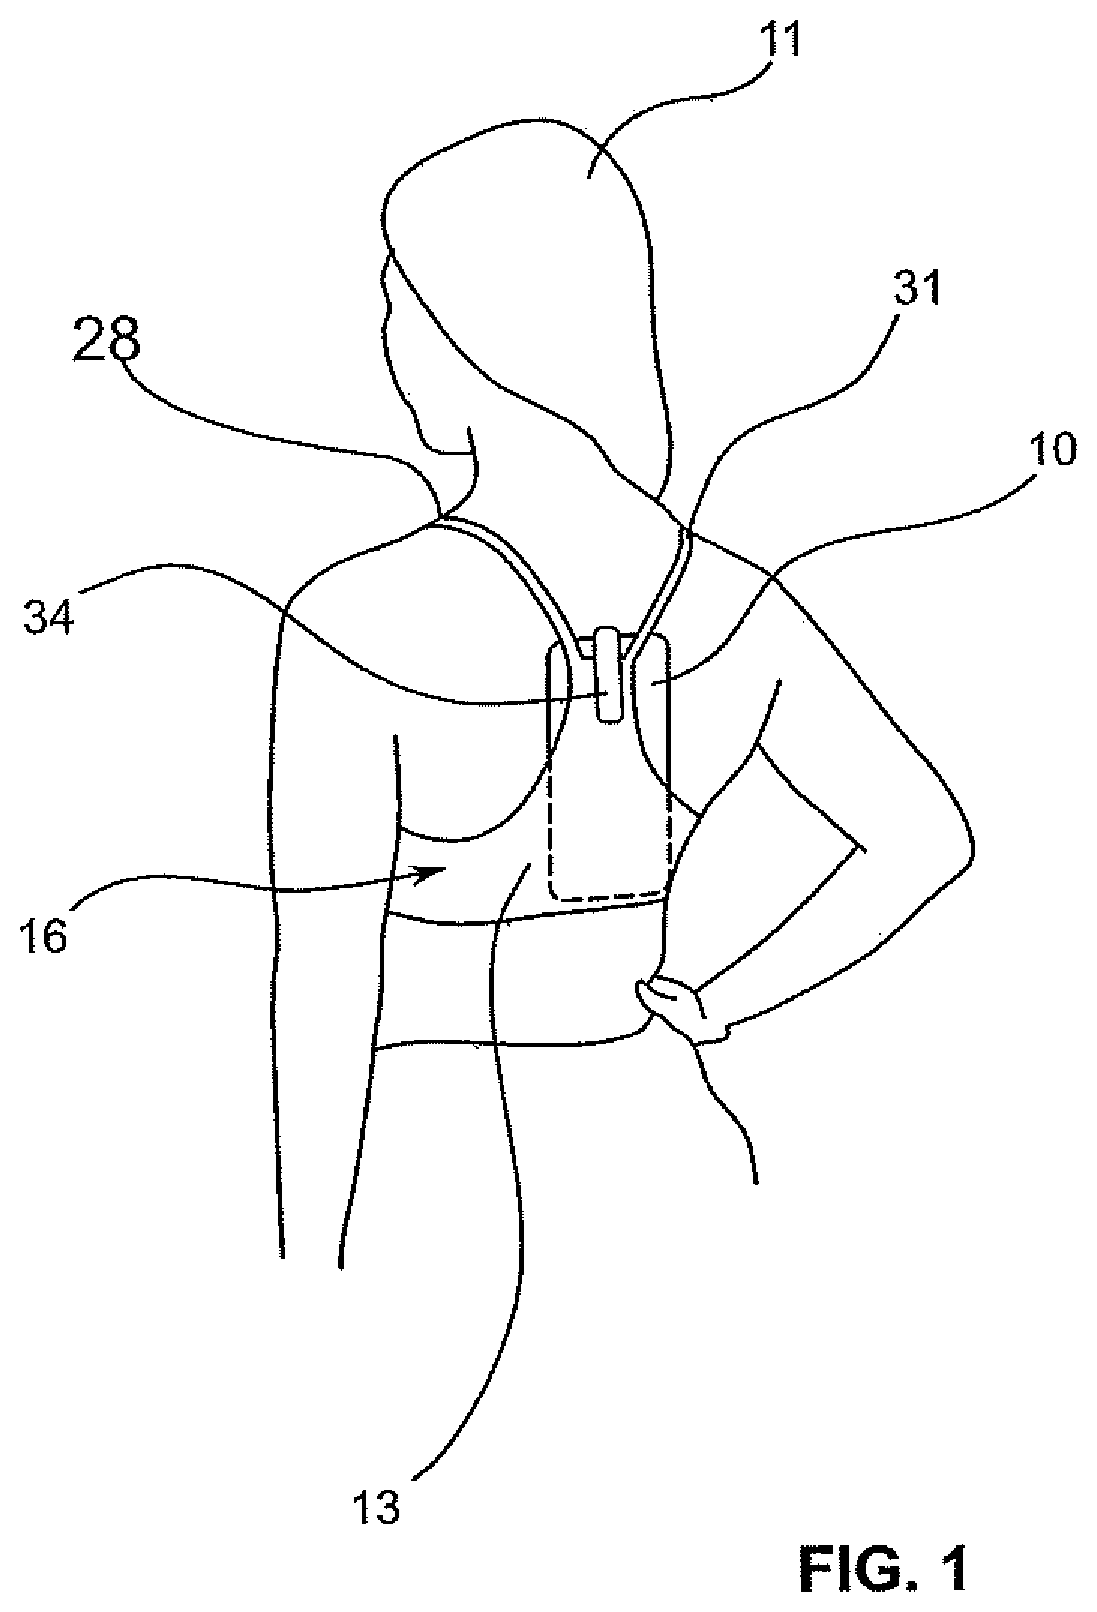 Removable pouch for attachment to the back of an exercise garment